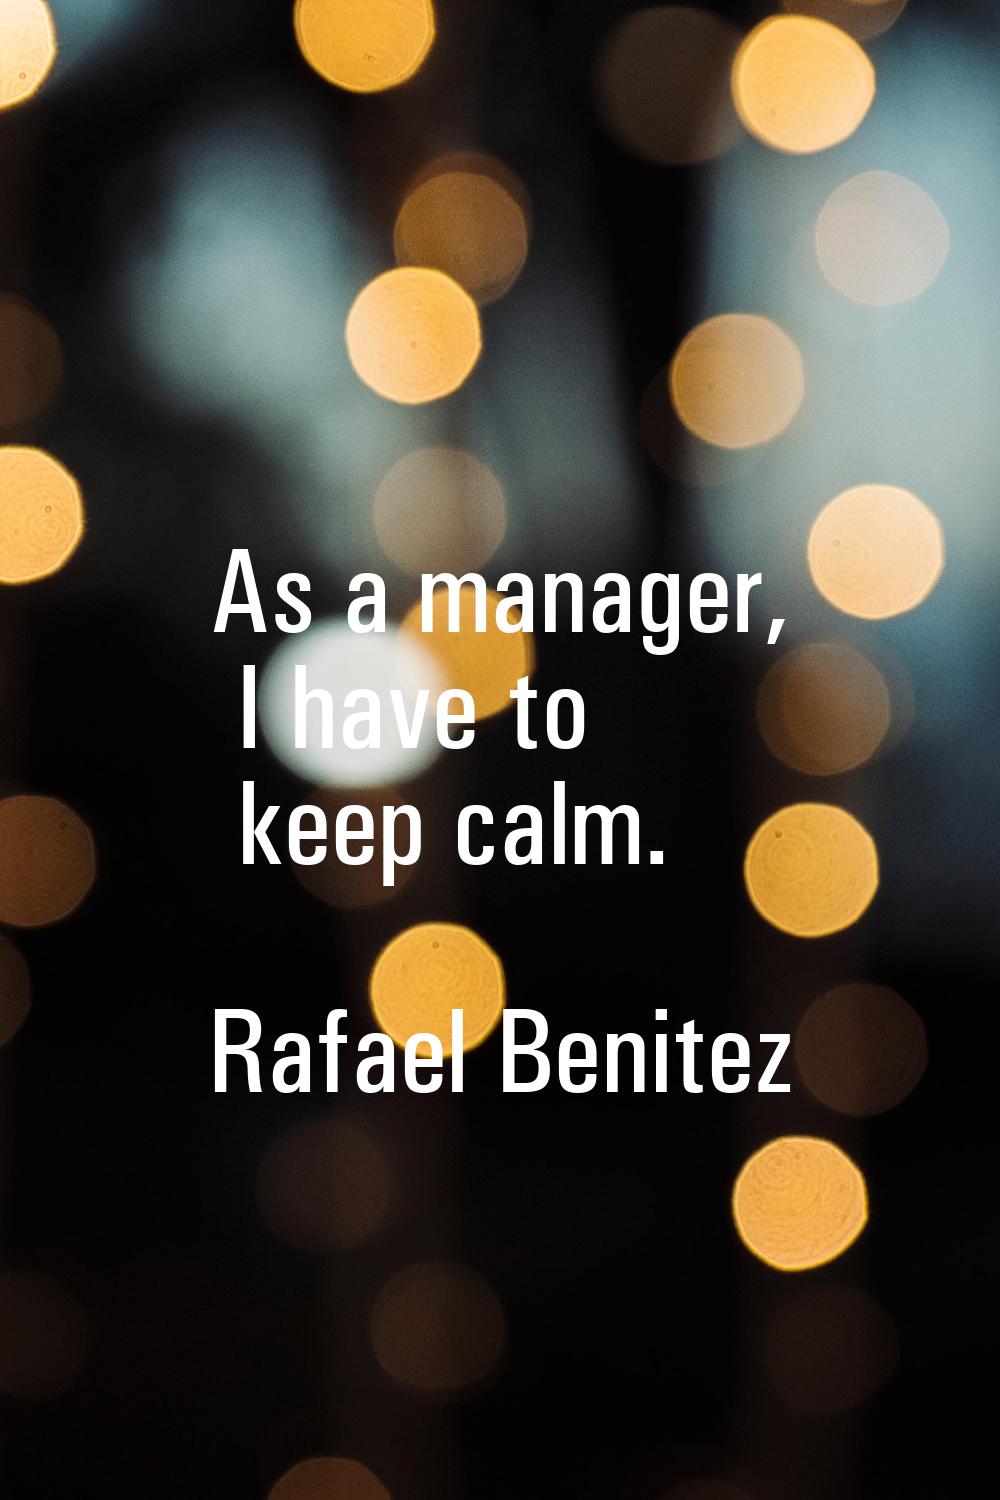 As a manager, I have to keep calm.